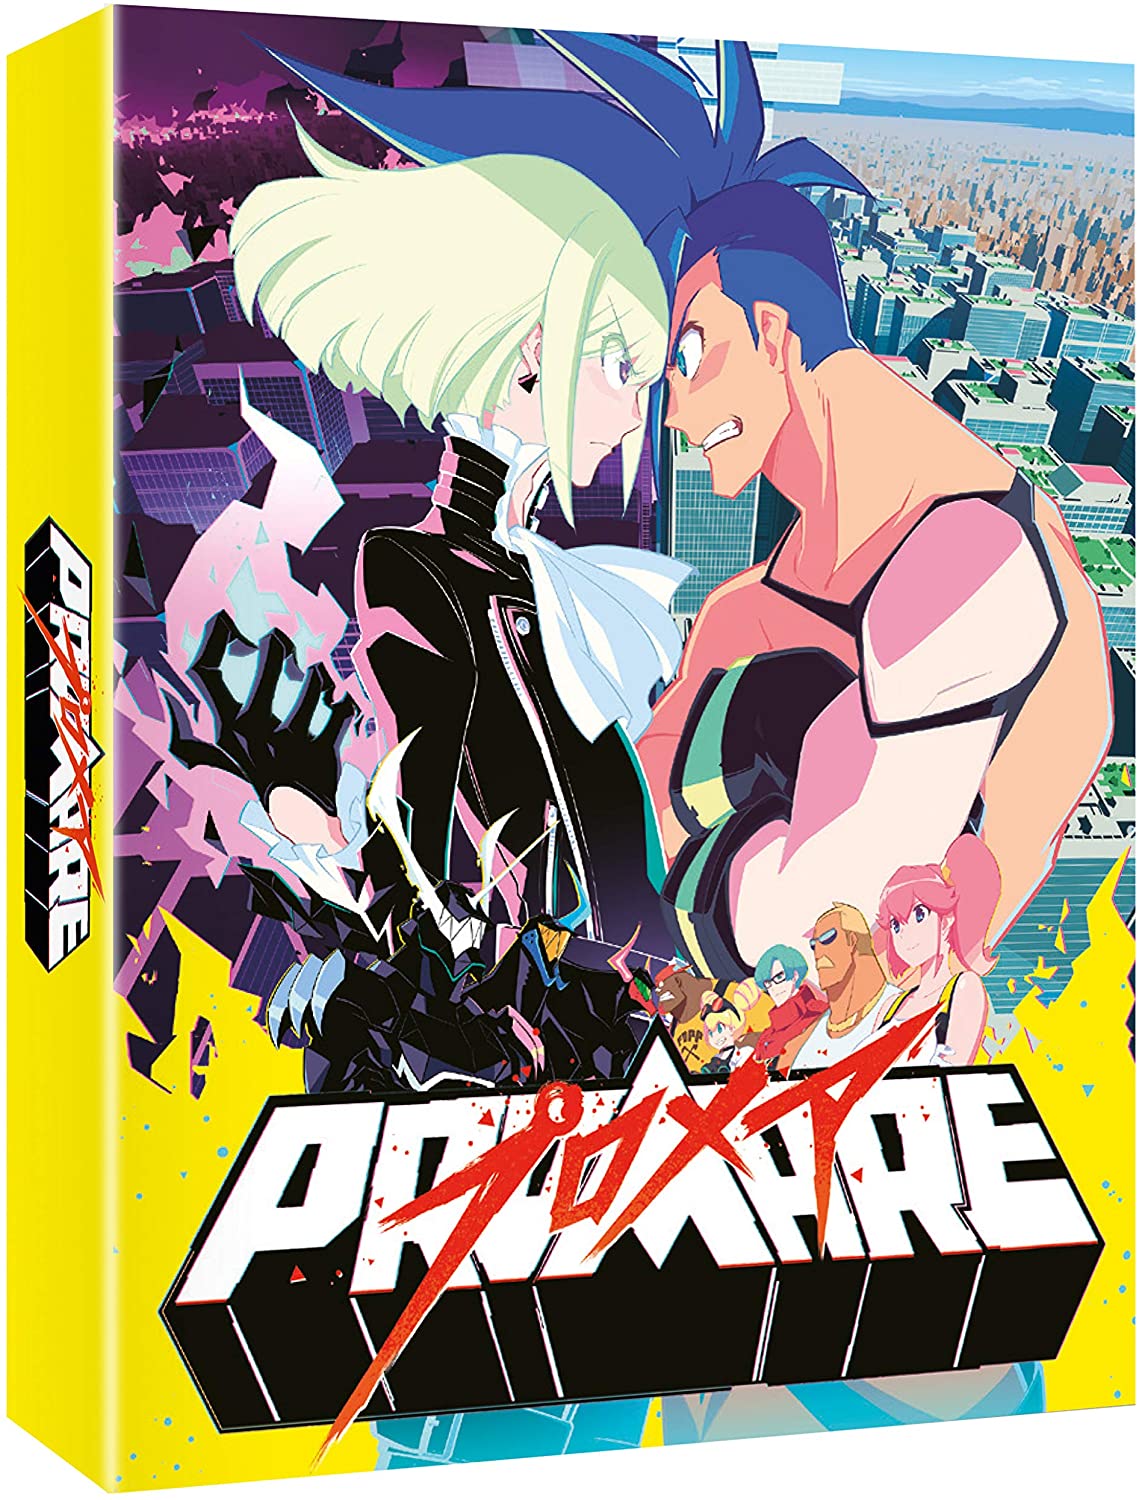 PROMARE Promotional Poster TypeA 2019 Japanese Anime